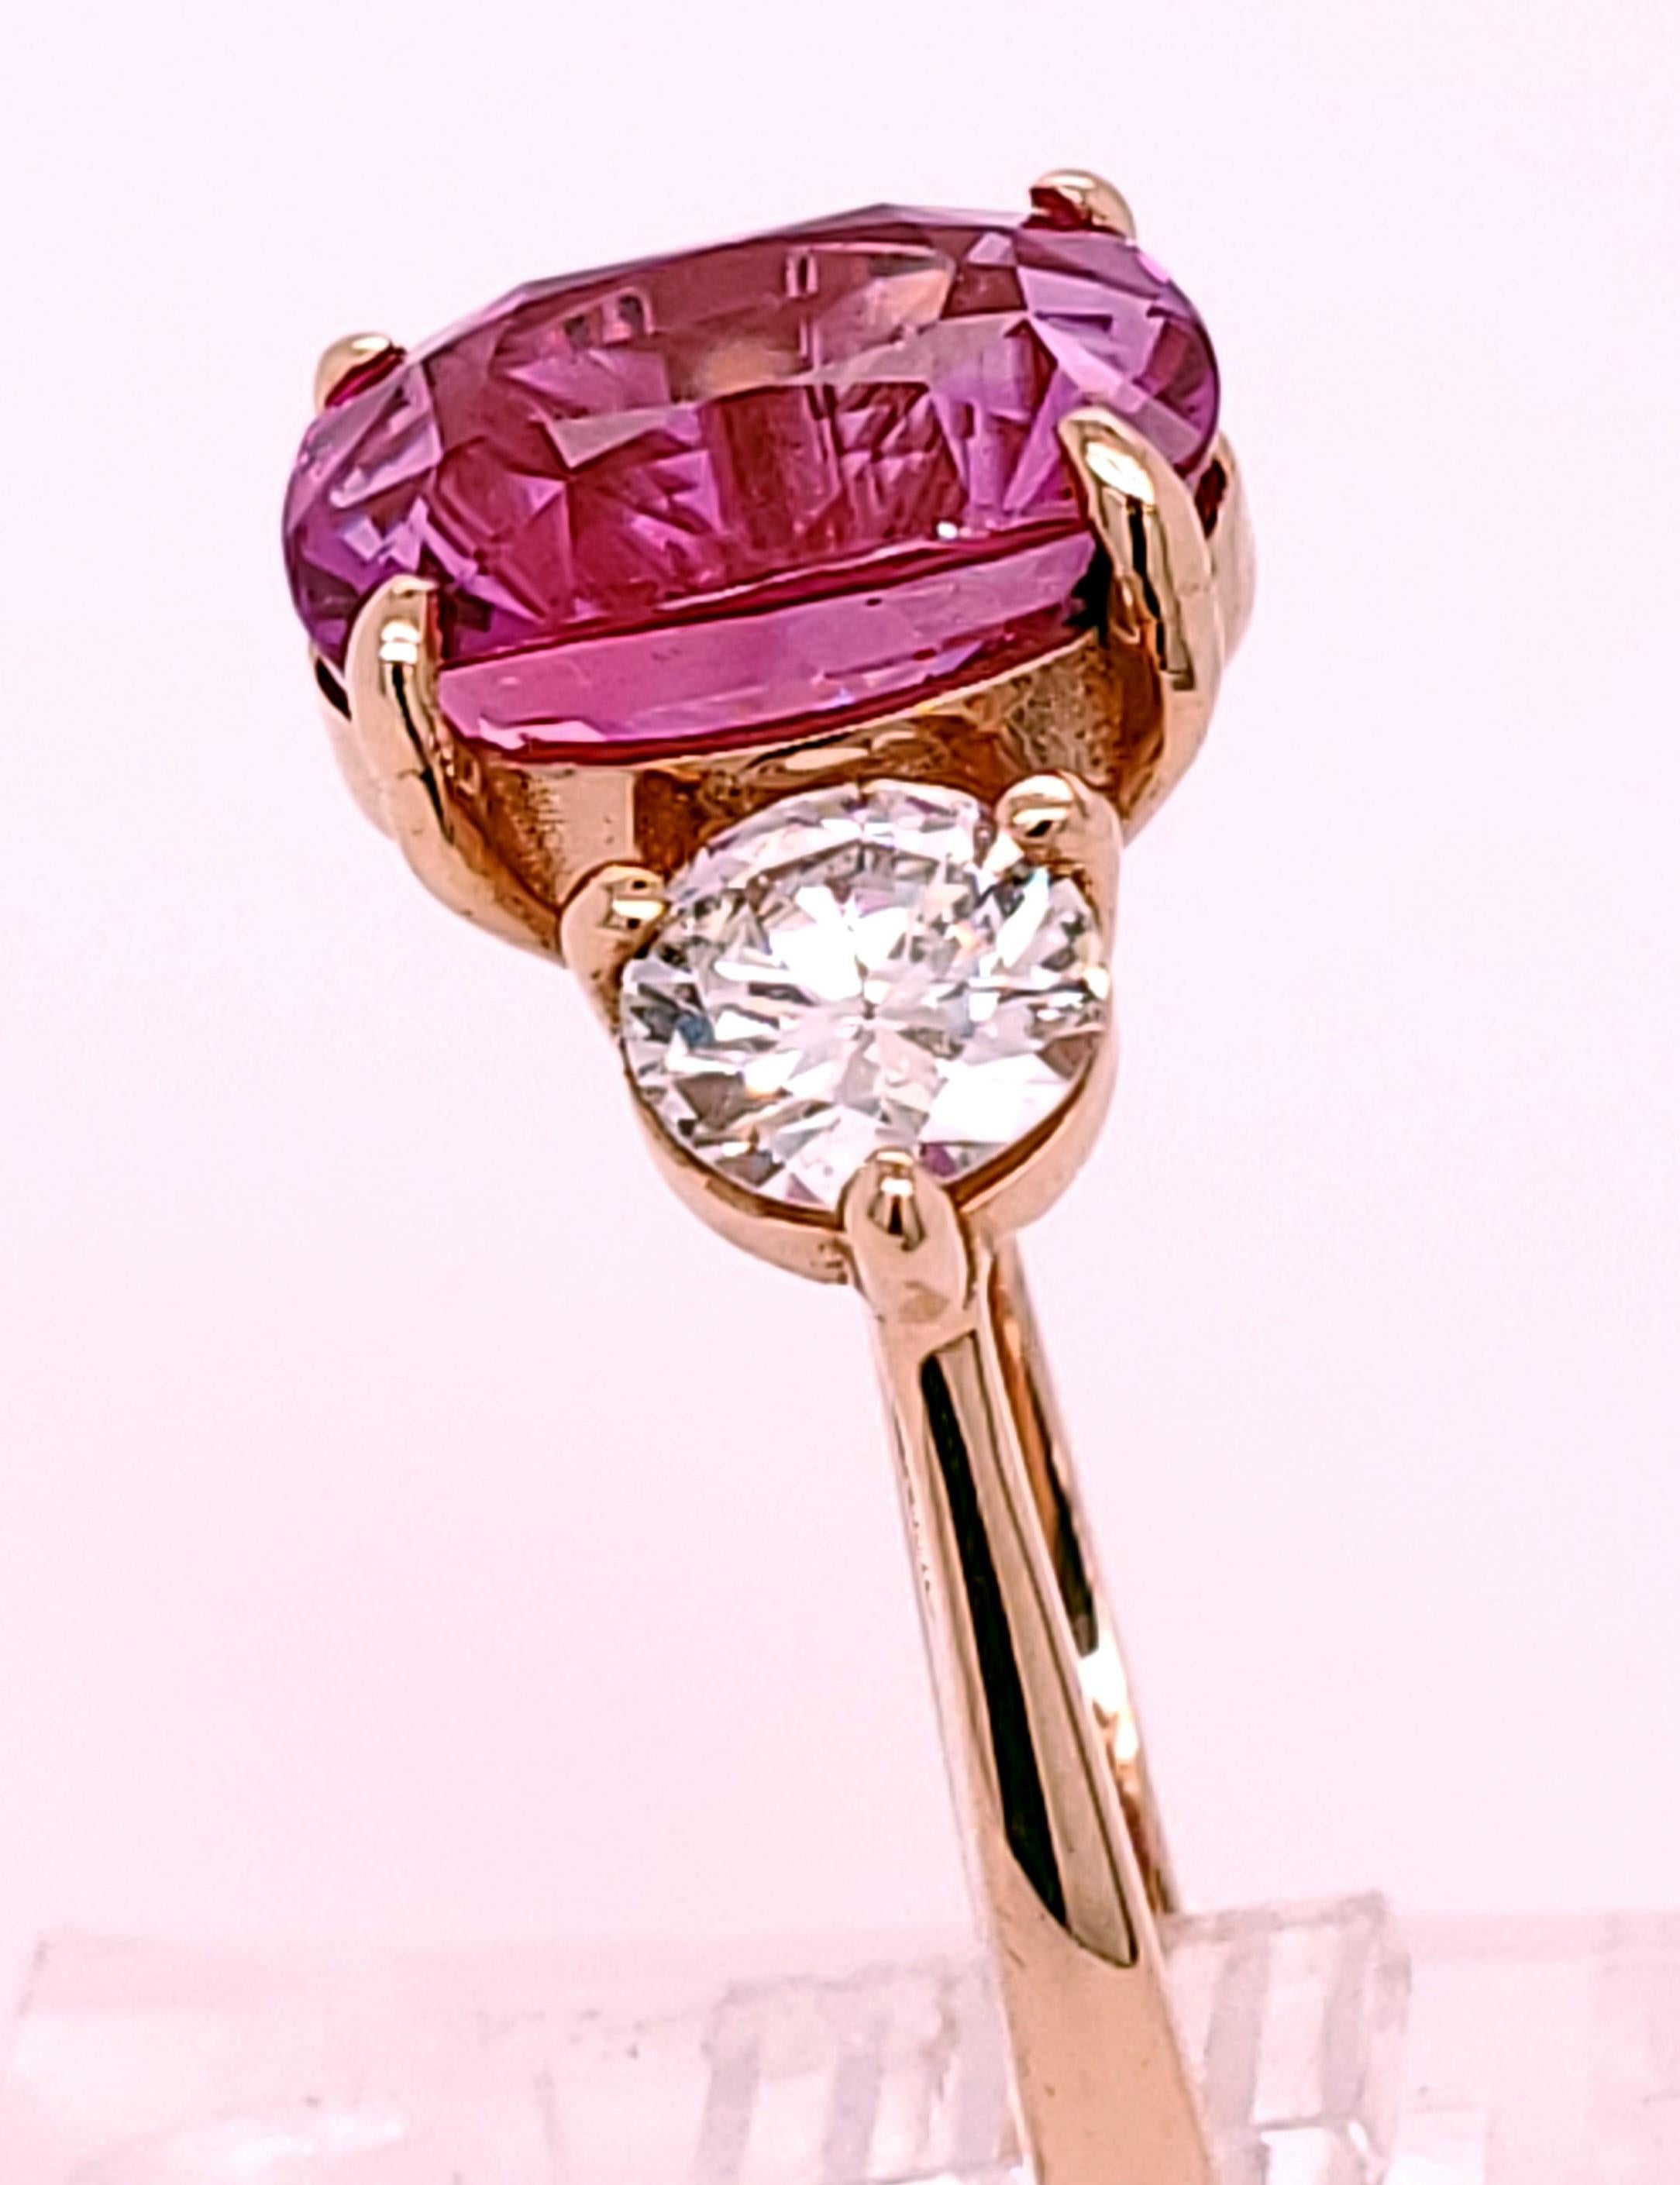 Cushion Cut AGL Certed 5.33ct NEON Pink Sapphire & 1ct Diamonds Total Wt in 18kt Gold Ring! For Sale